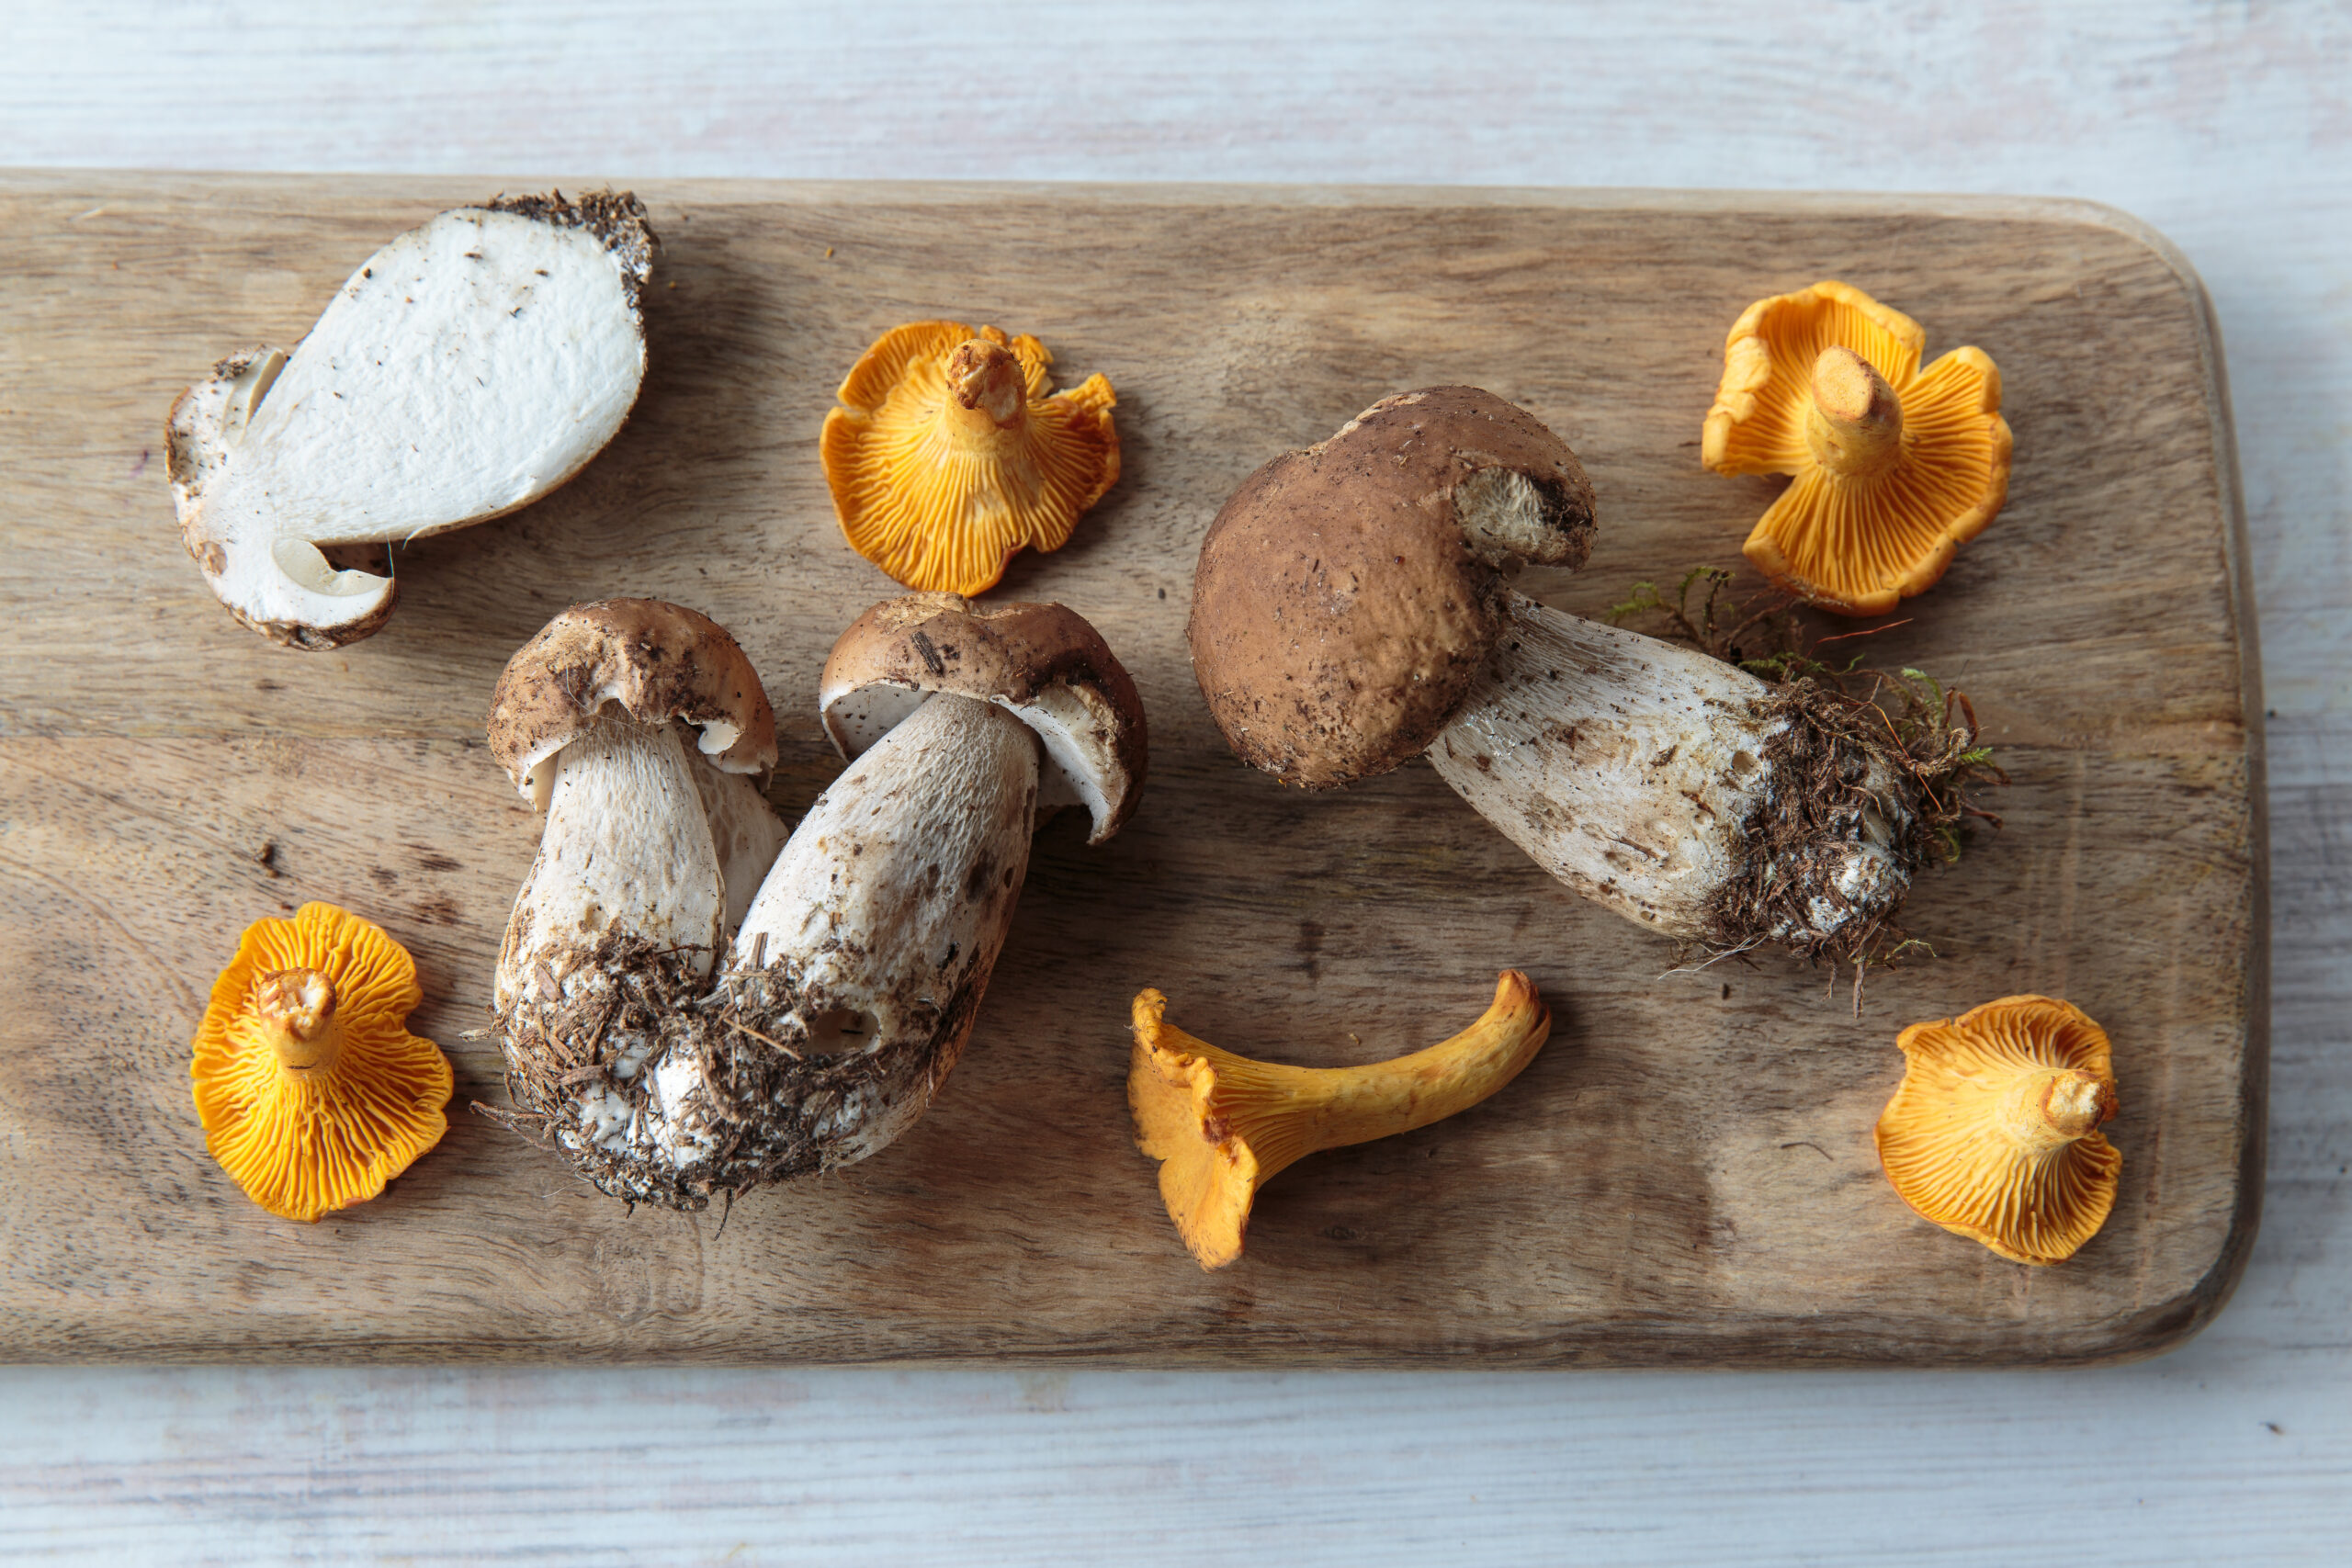 How to Identify 6 Types of Edible Mushrooms